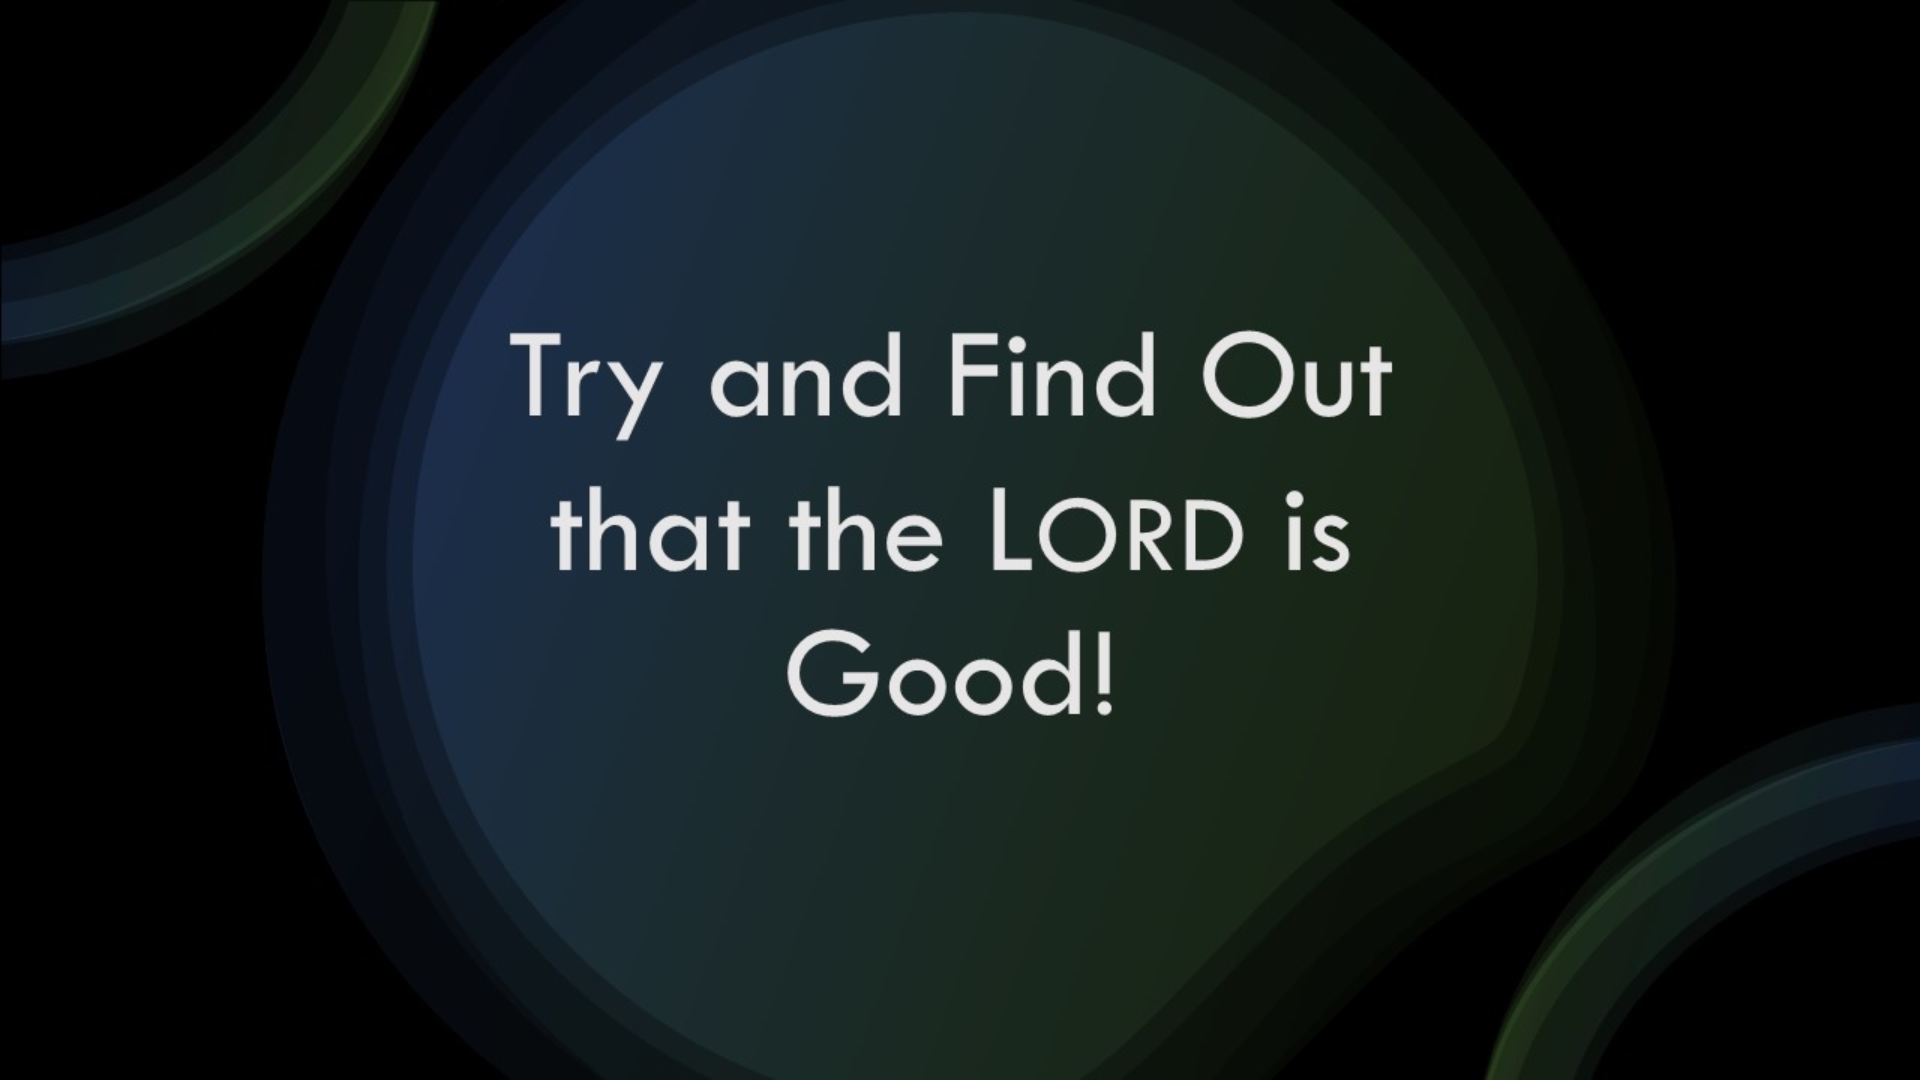 Try and Find Out that the LORD is Good